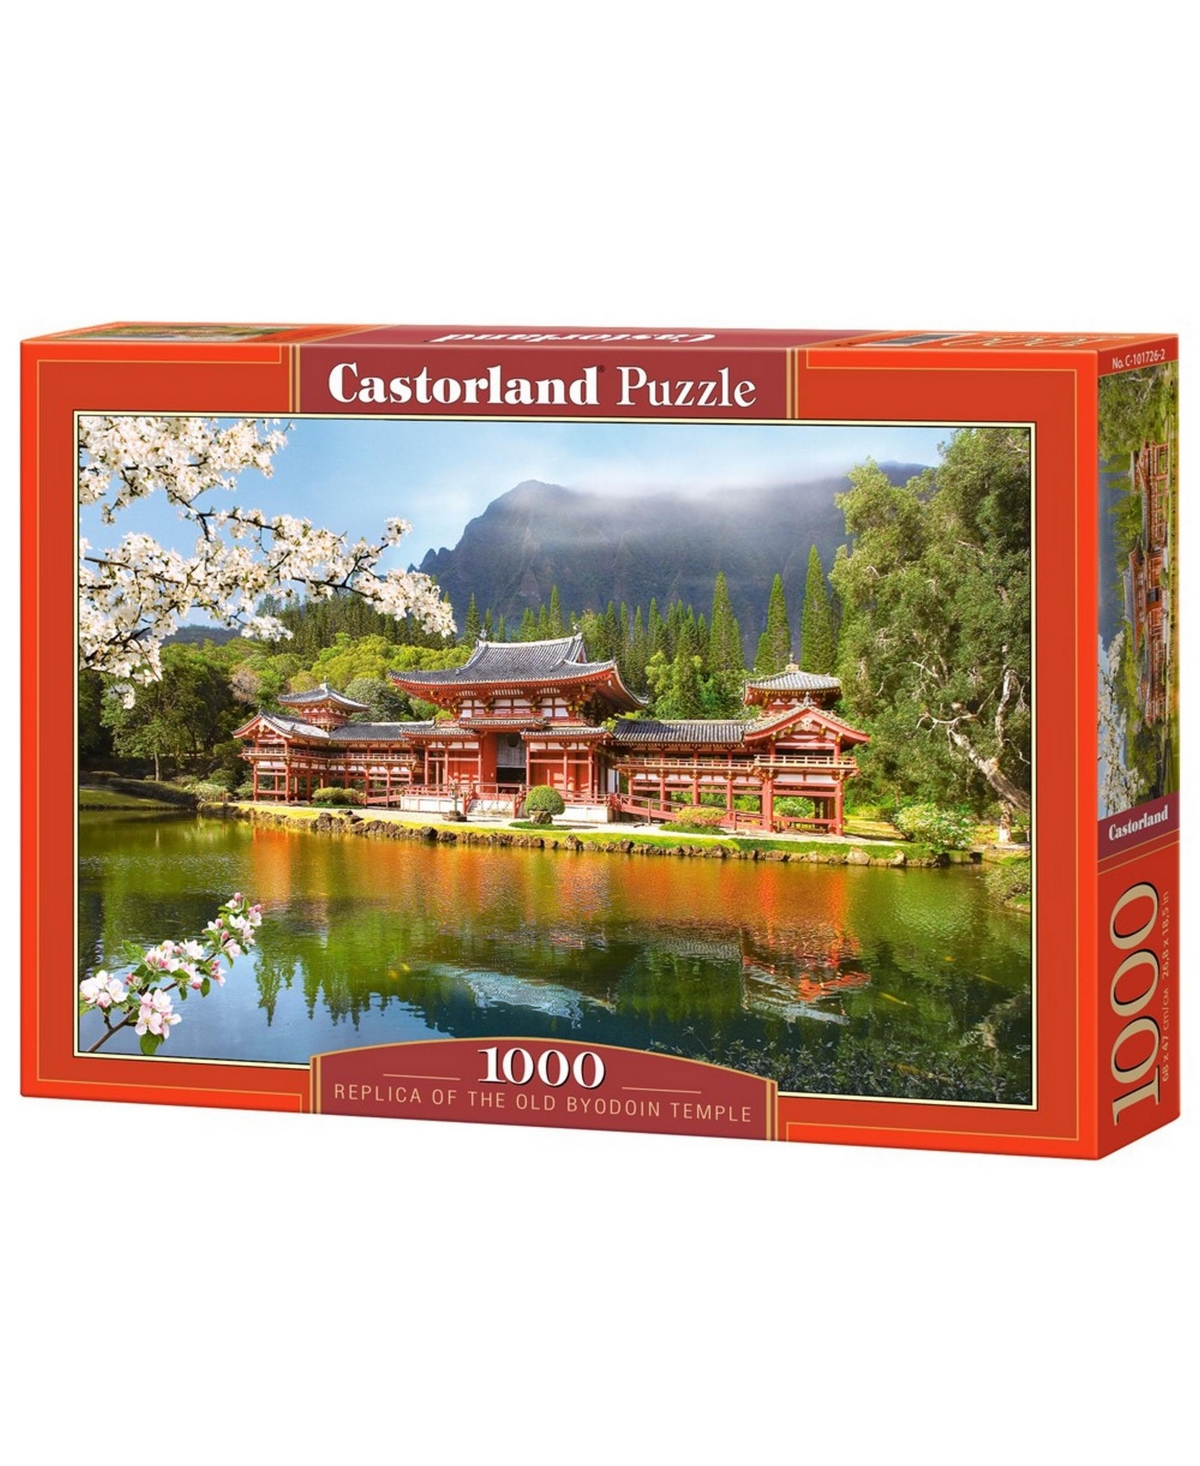 Castorland Kids' Replica Of The Old Byodion Temple Jigsaw Puzzle Set, 1000 Piece In Multicolor